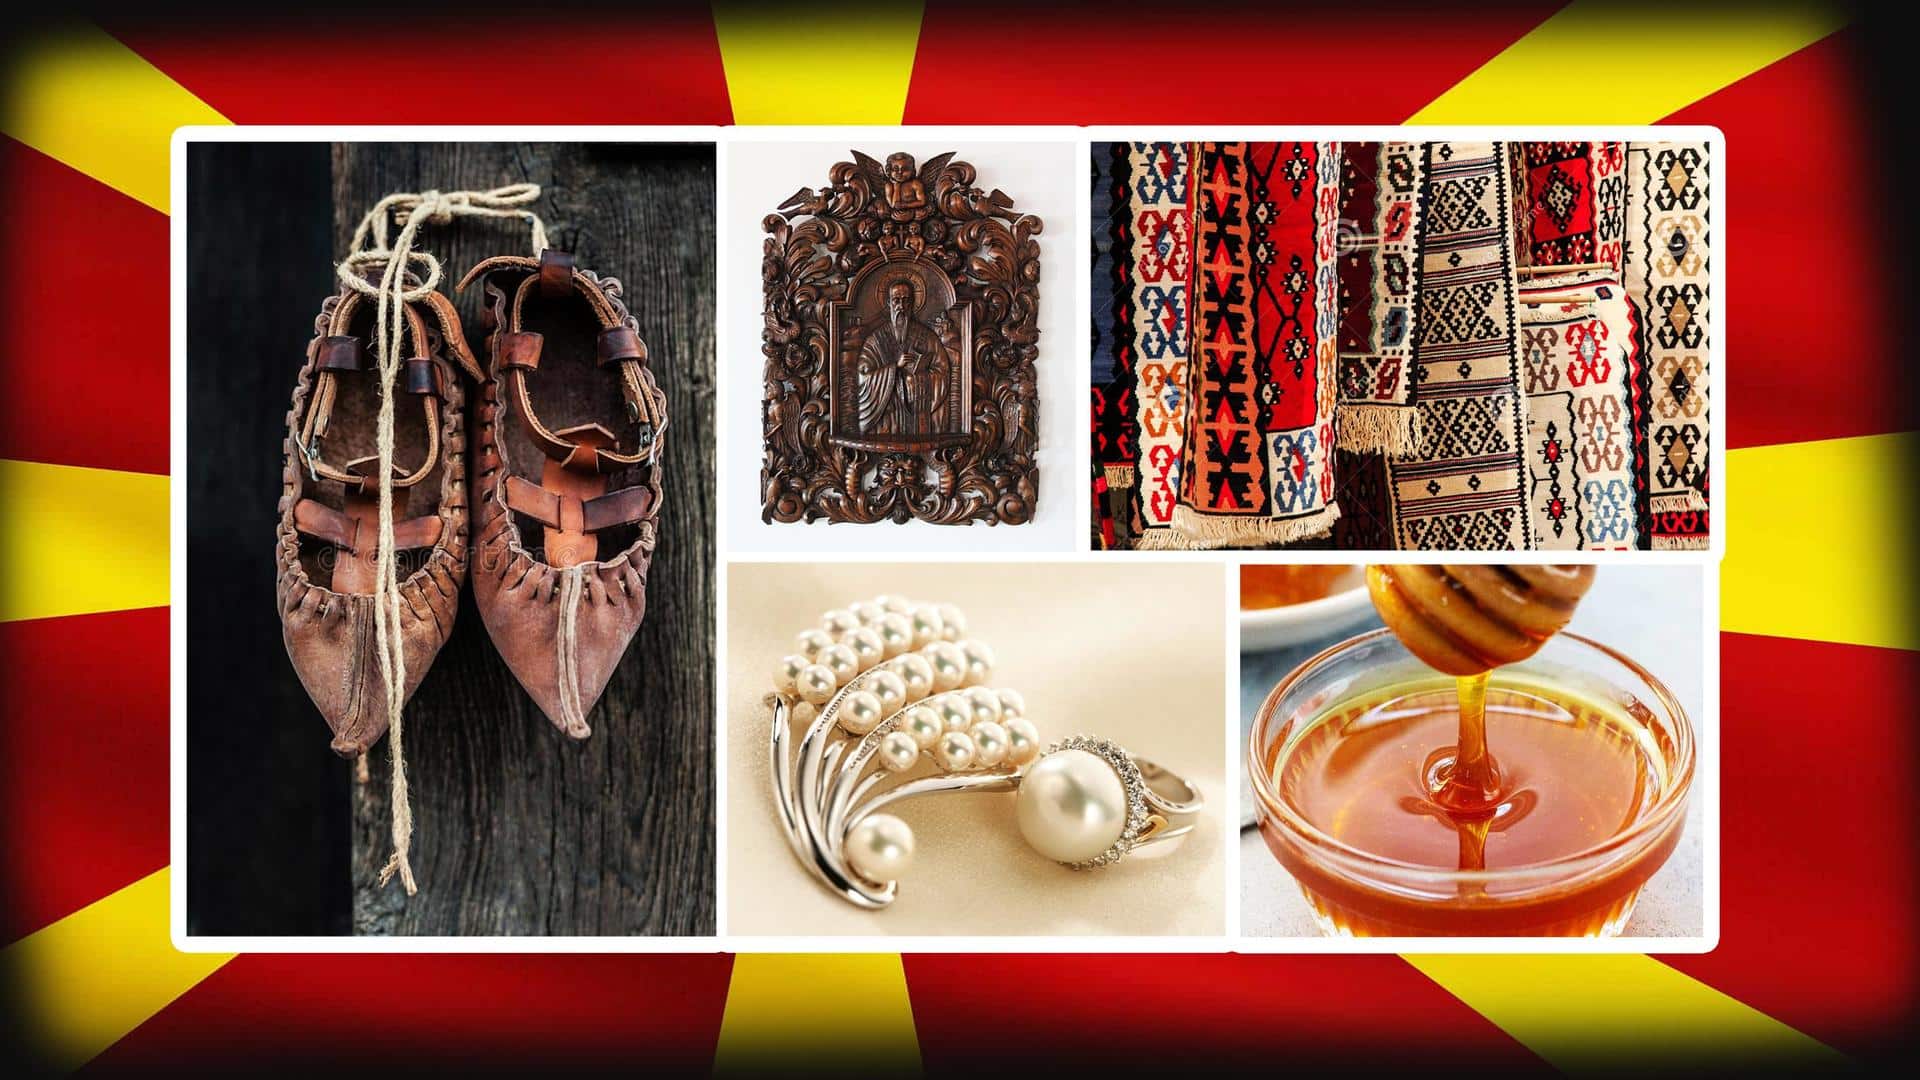 Souvenirs that capture North Macedonia's essence